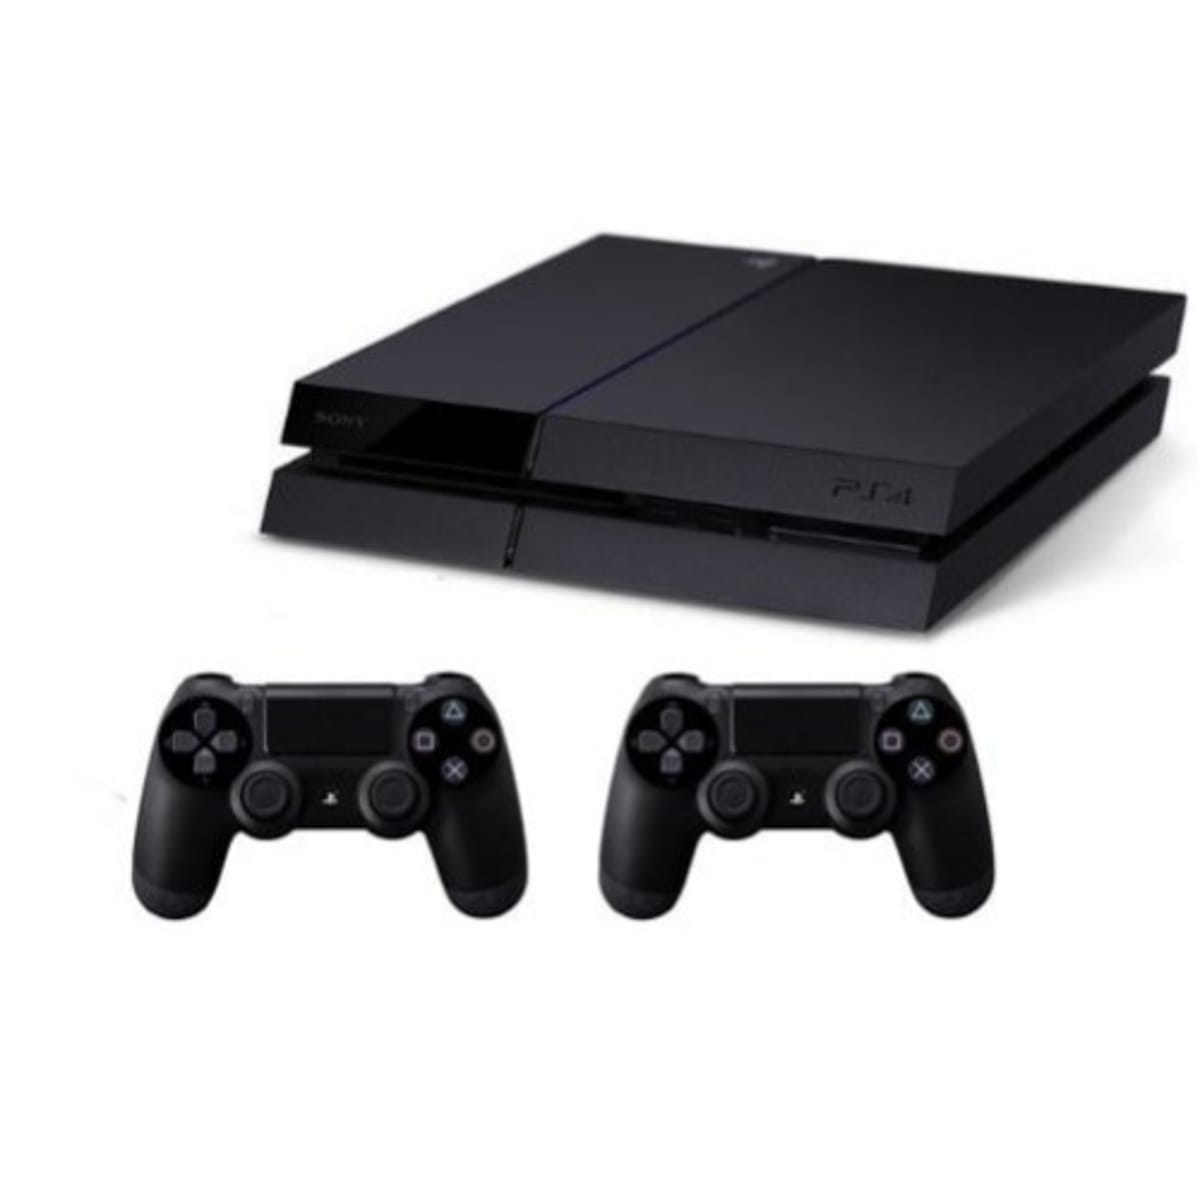 Sony PS4 Console 500gb With 2 Dualshock Controllers